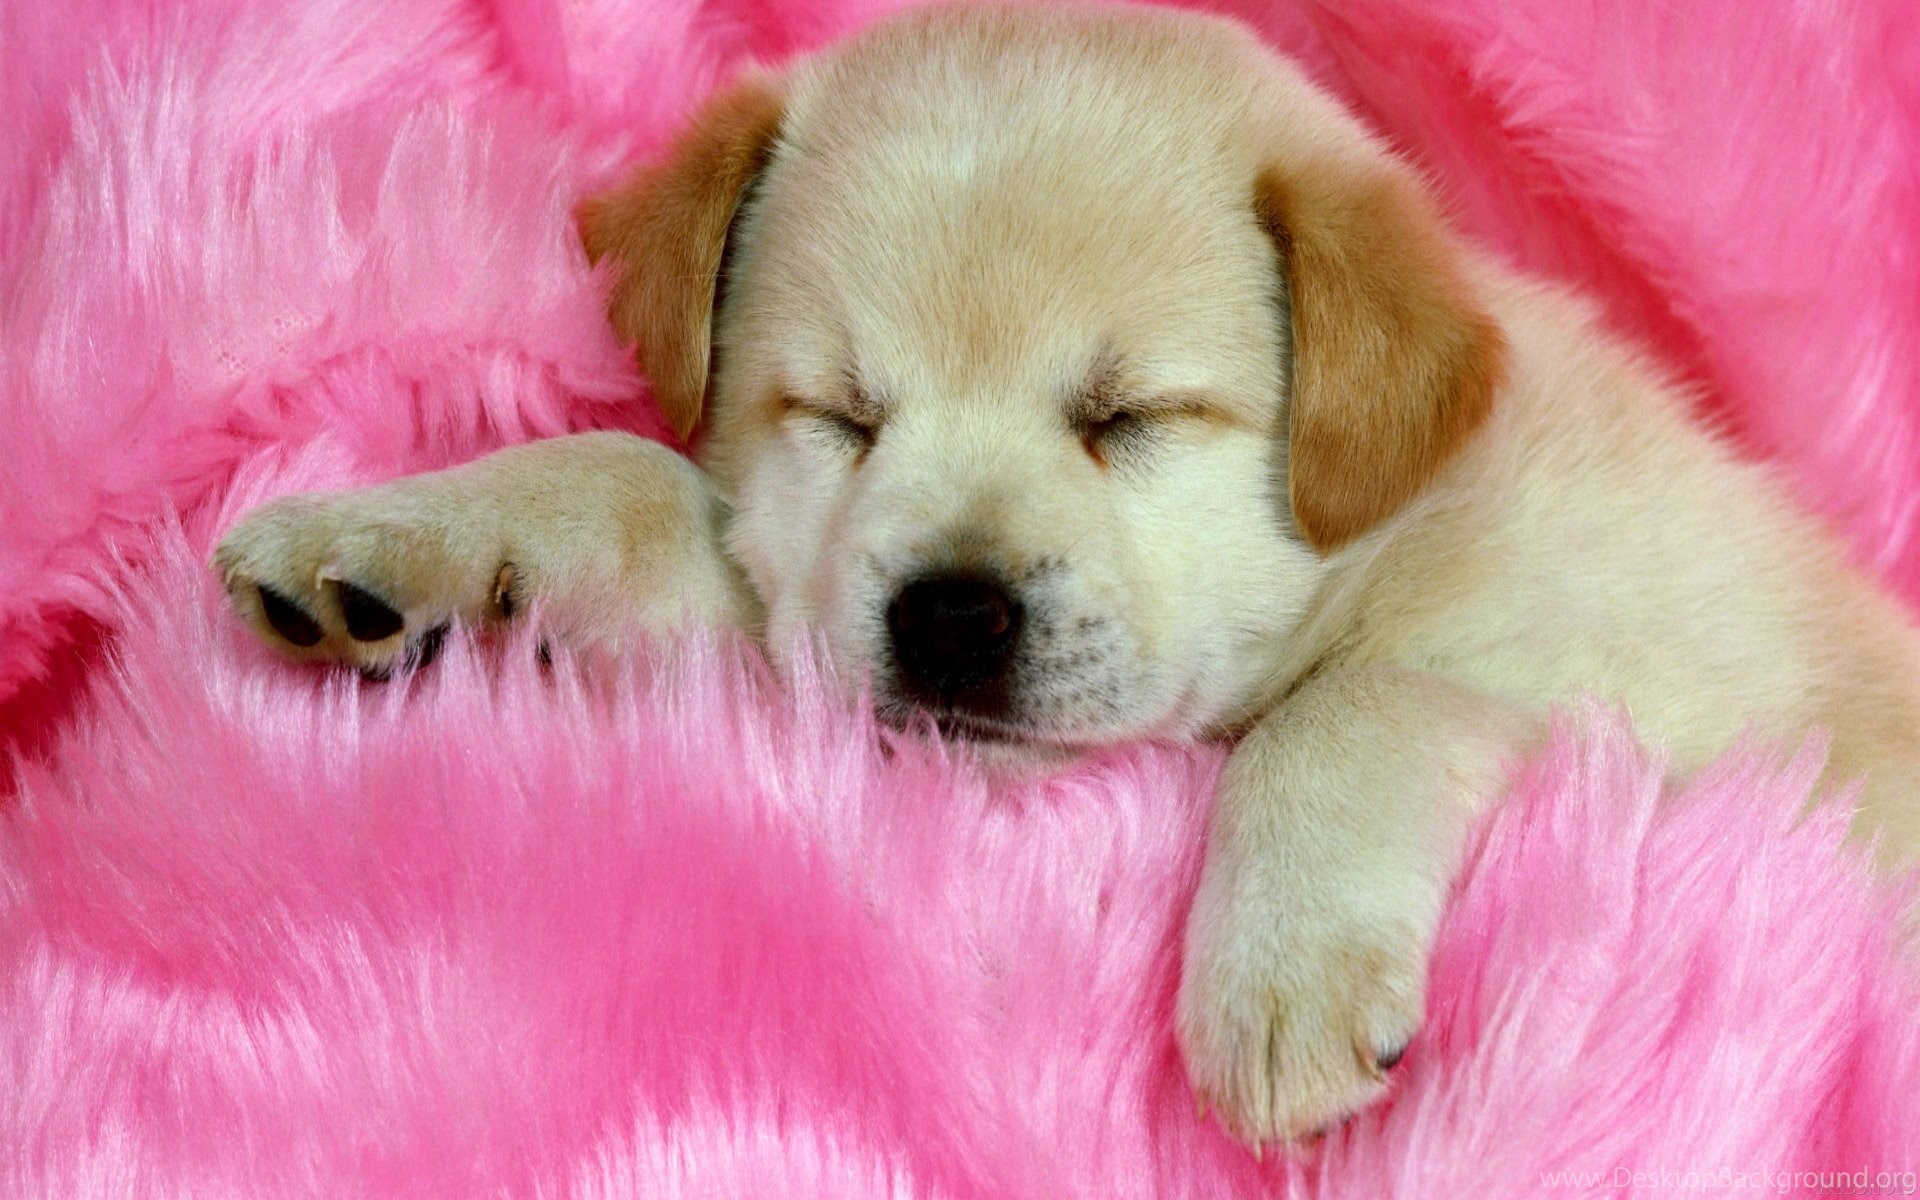 Cute Puppy Valentines Day Wallpapers